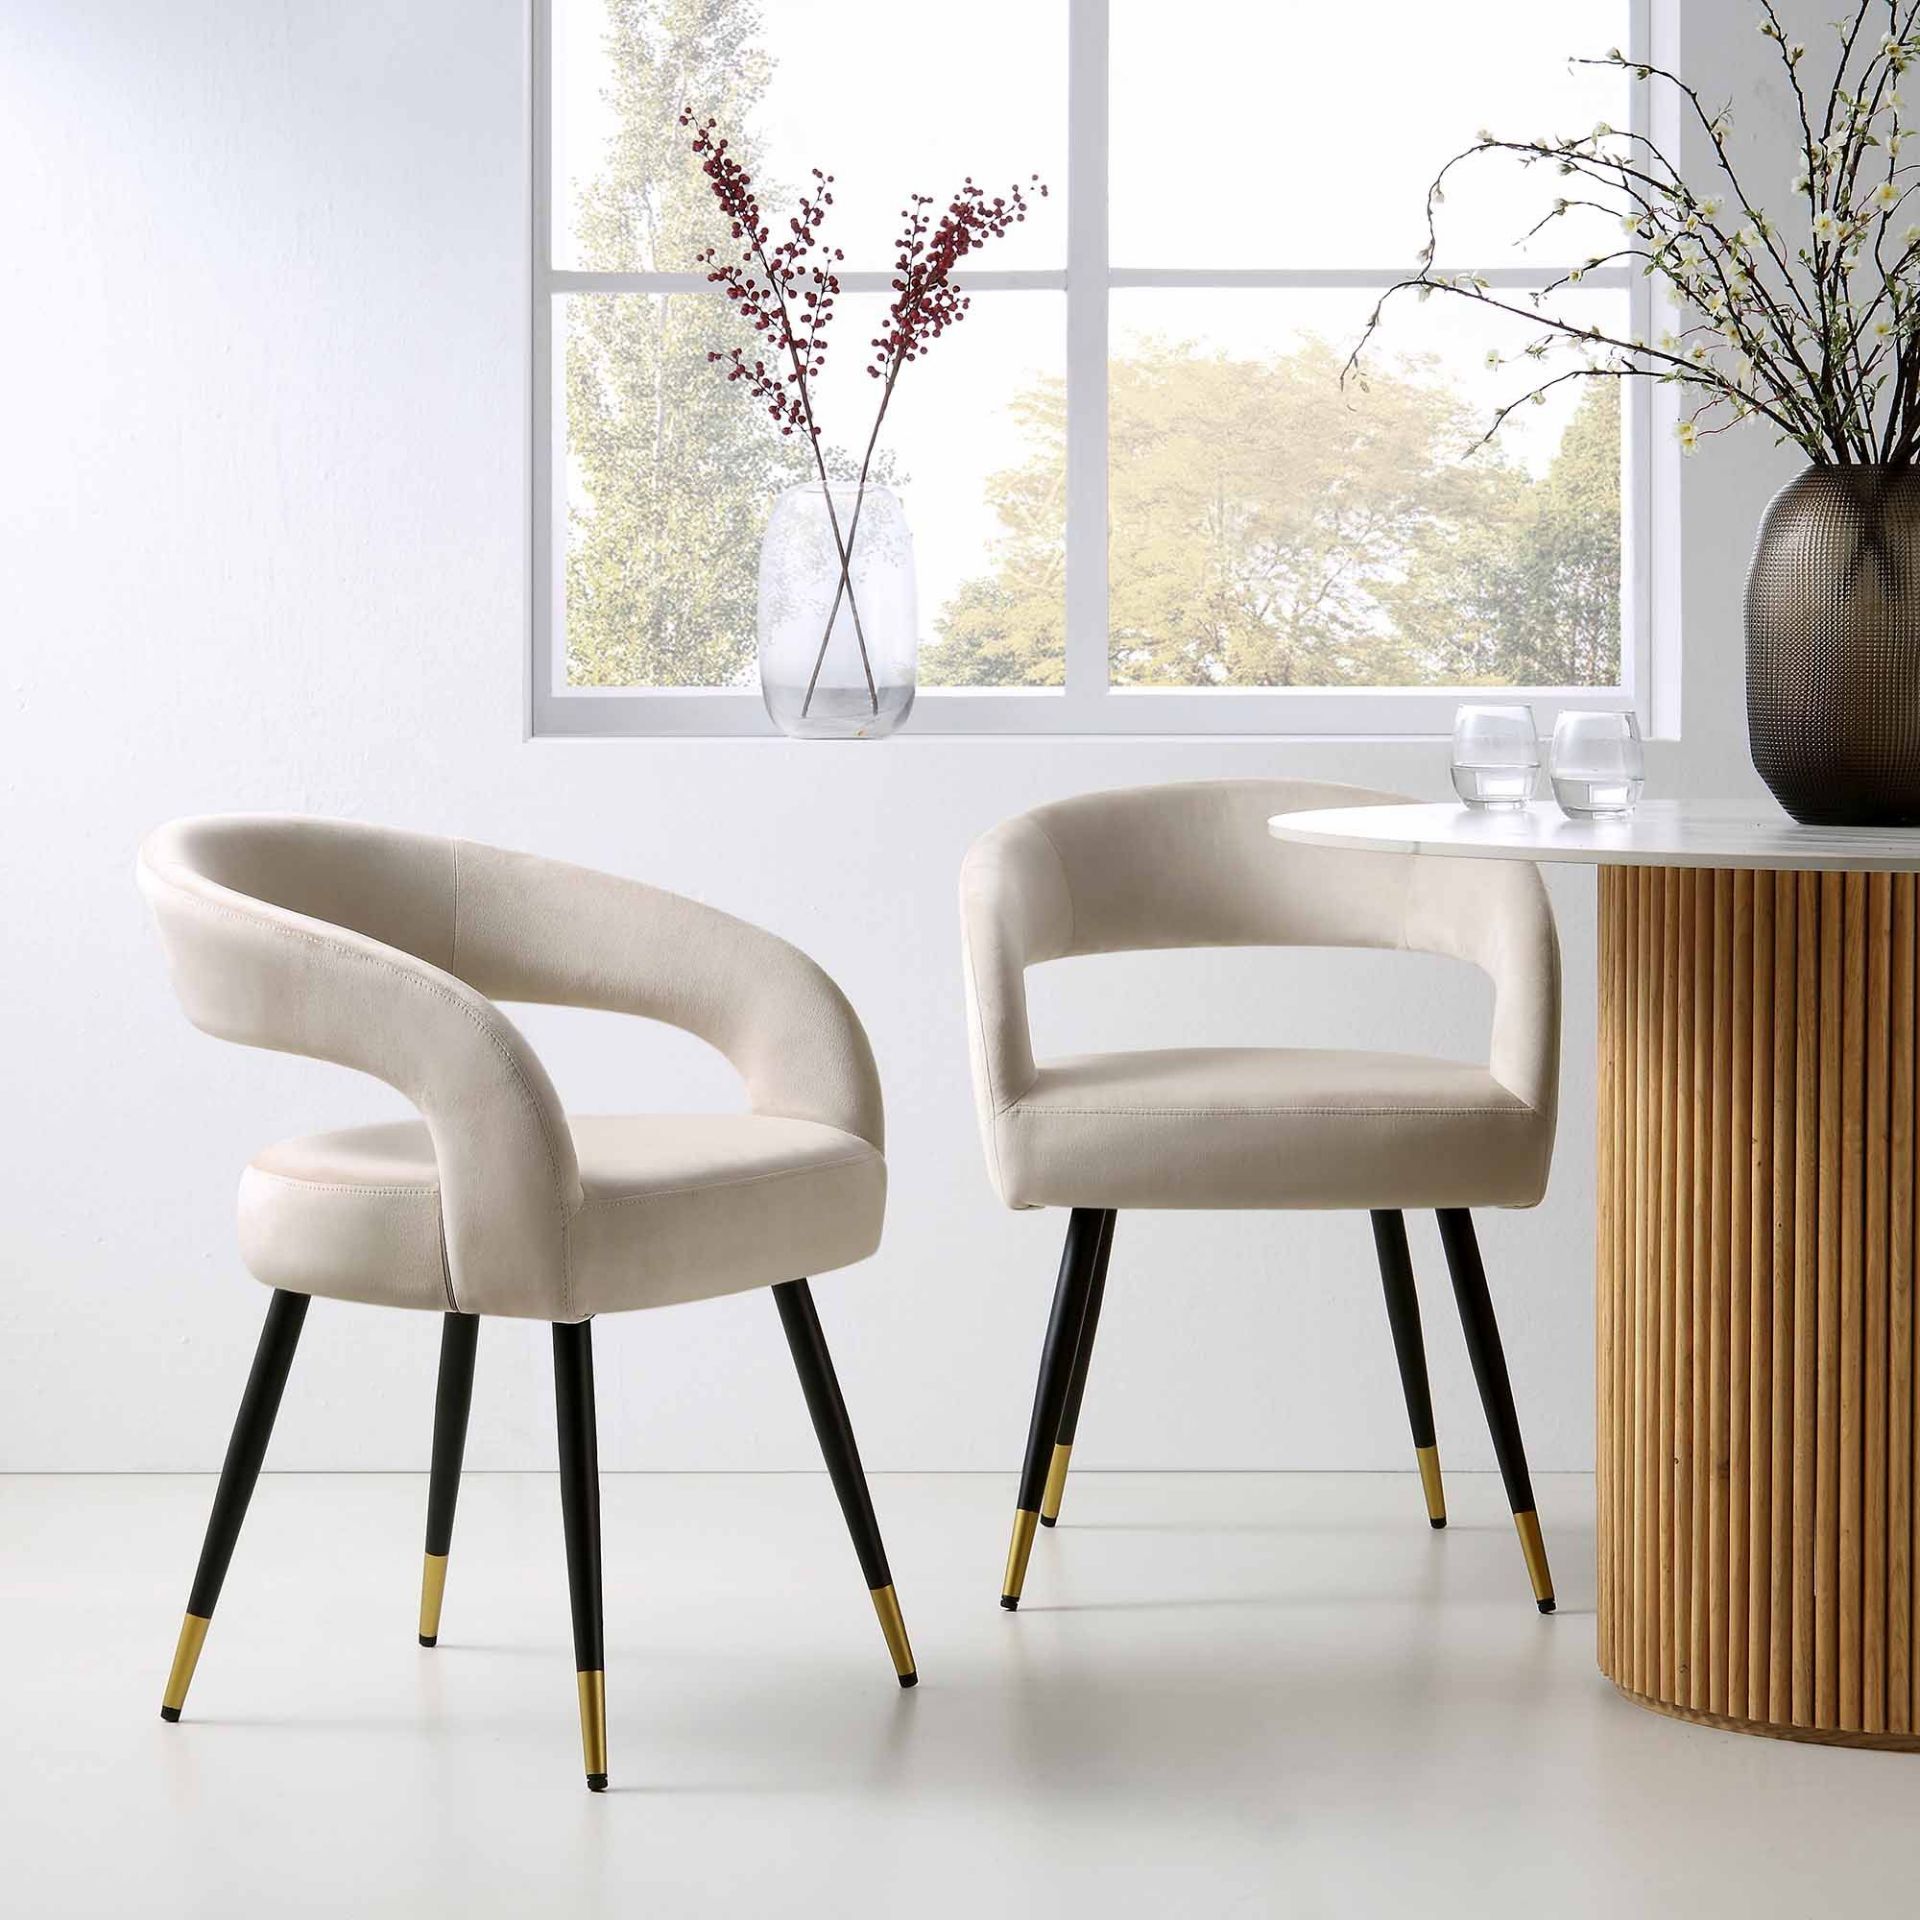 Laurel Wave Champagne Velvet Set of 2 Dining Chairs. - R19.2. RRP £299.99. The curved cut out